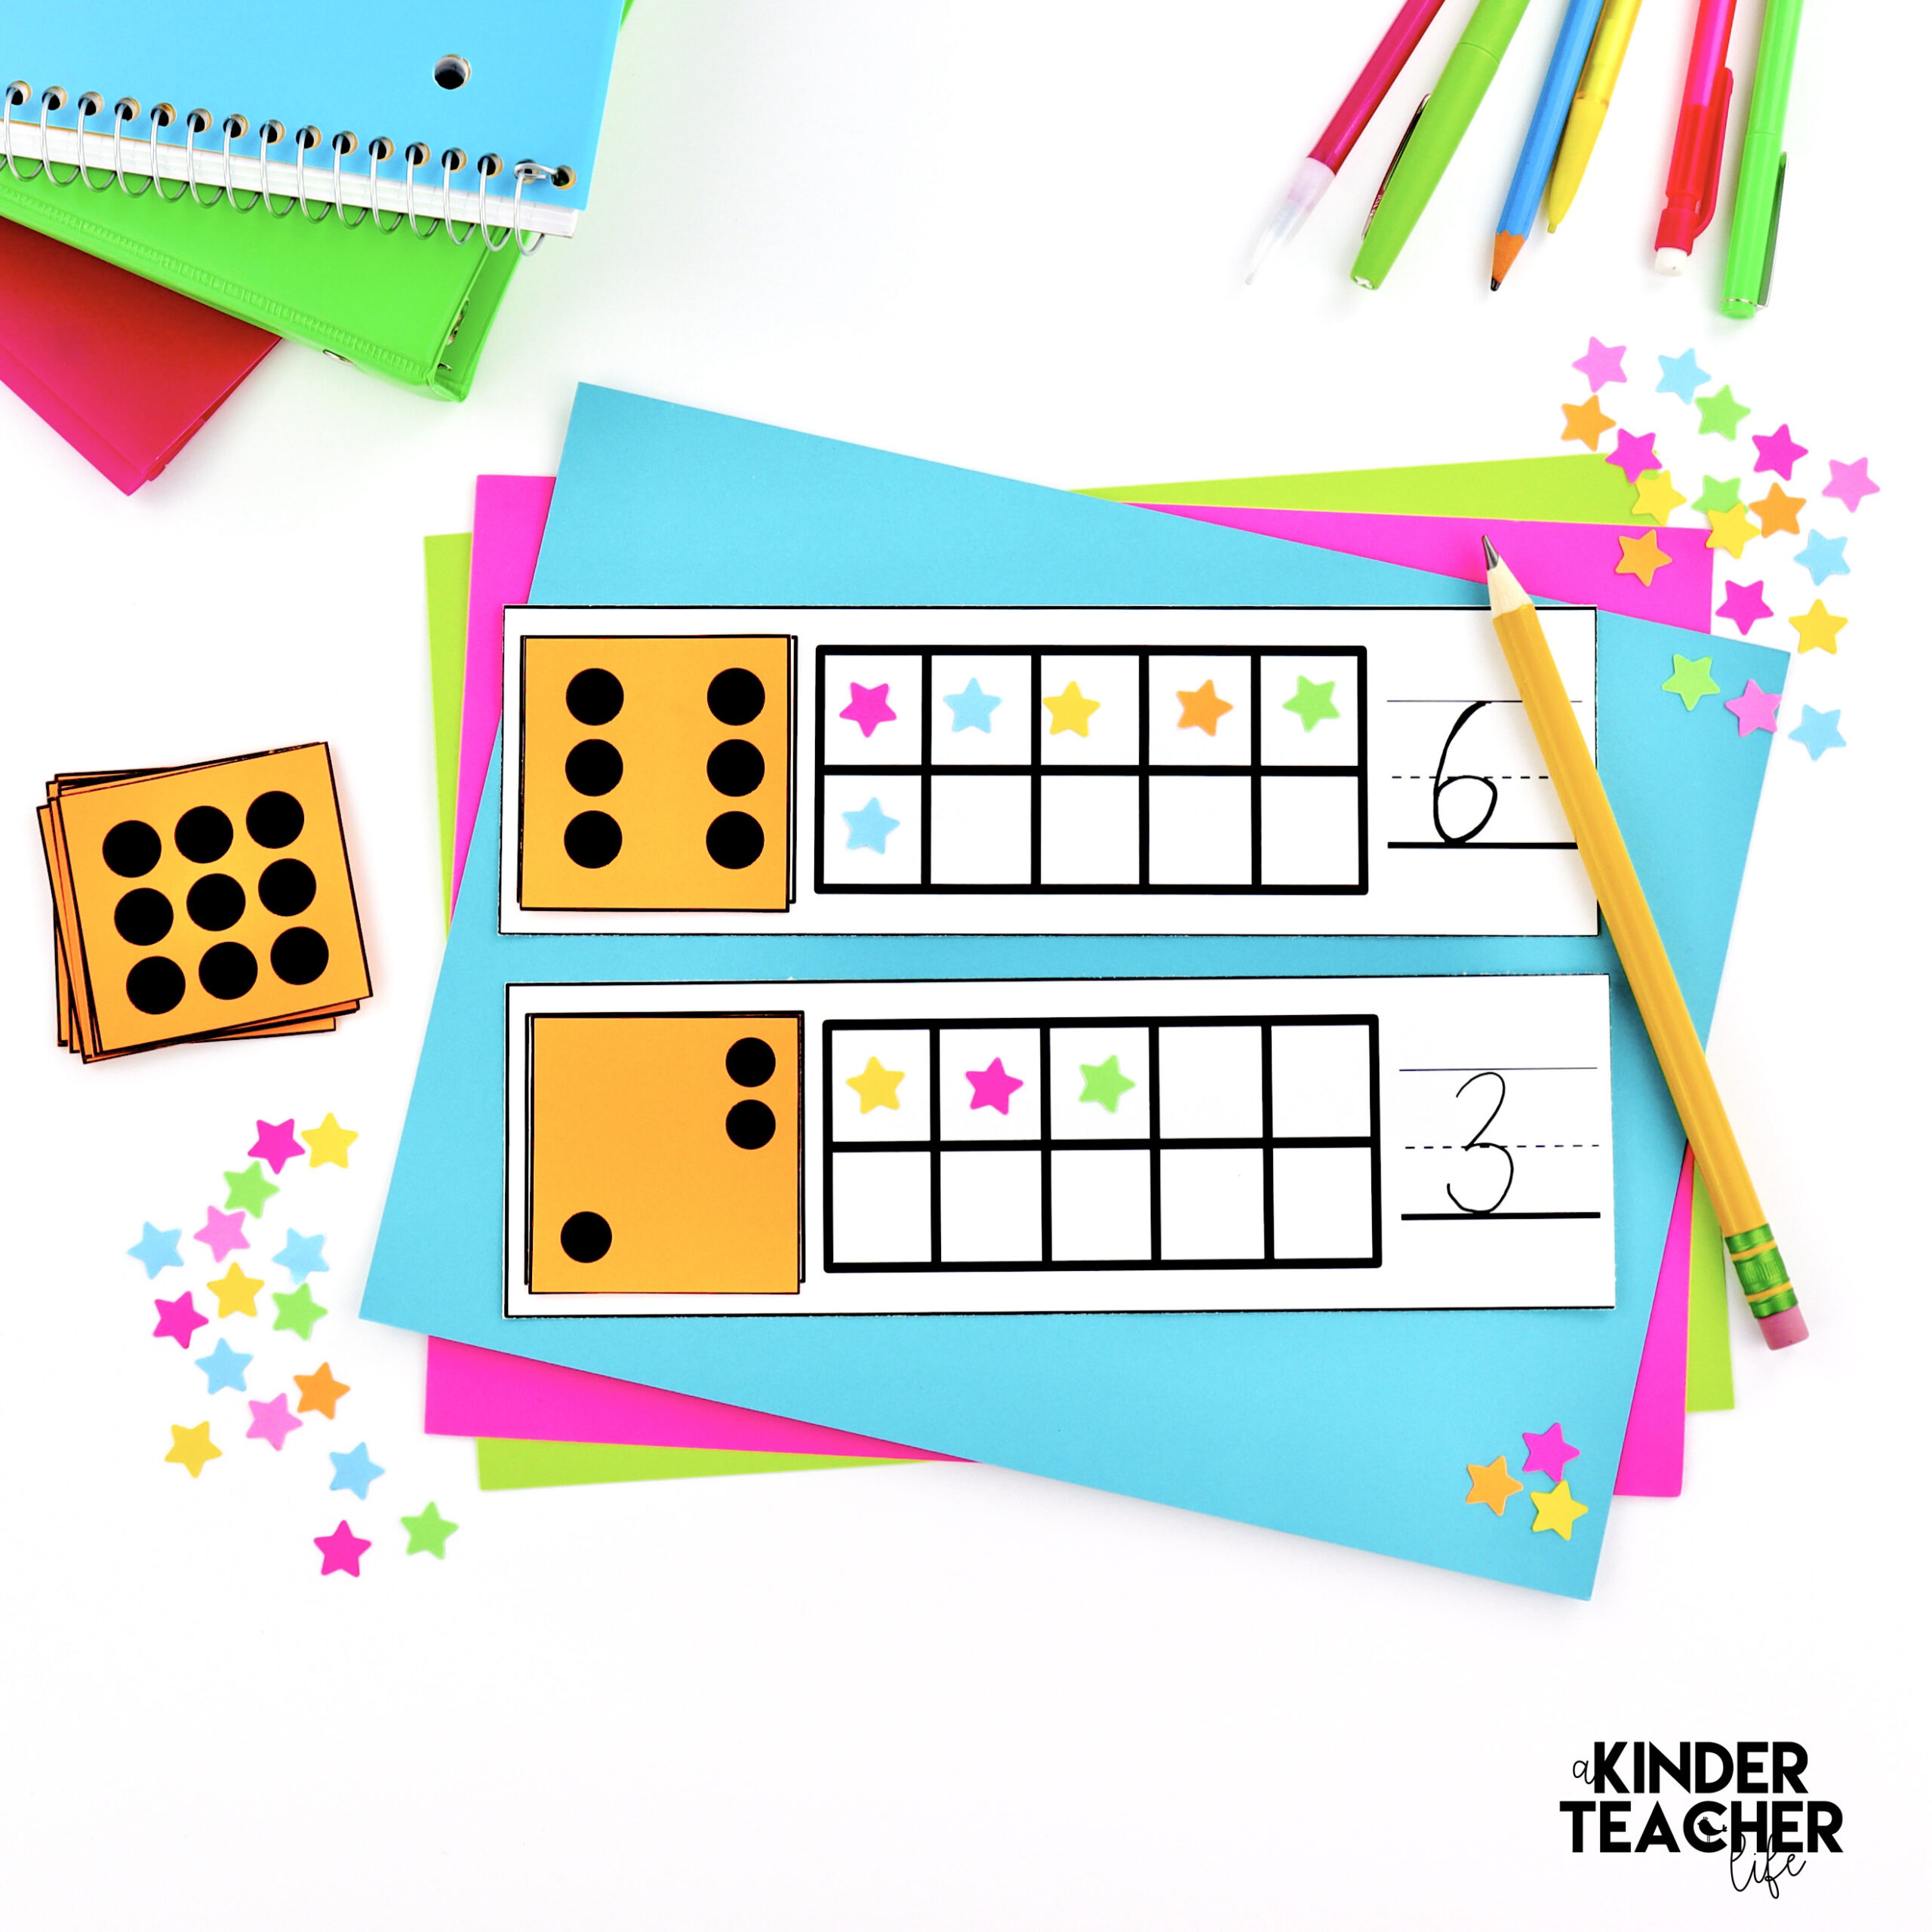 Fun Ways to Teach Number Recognition 1 to 10